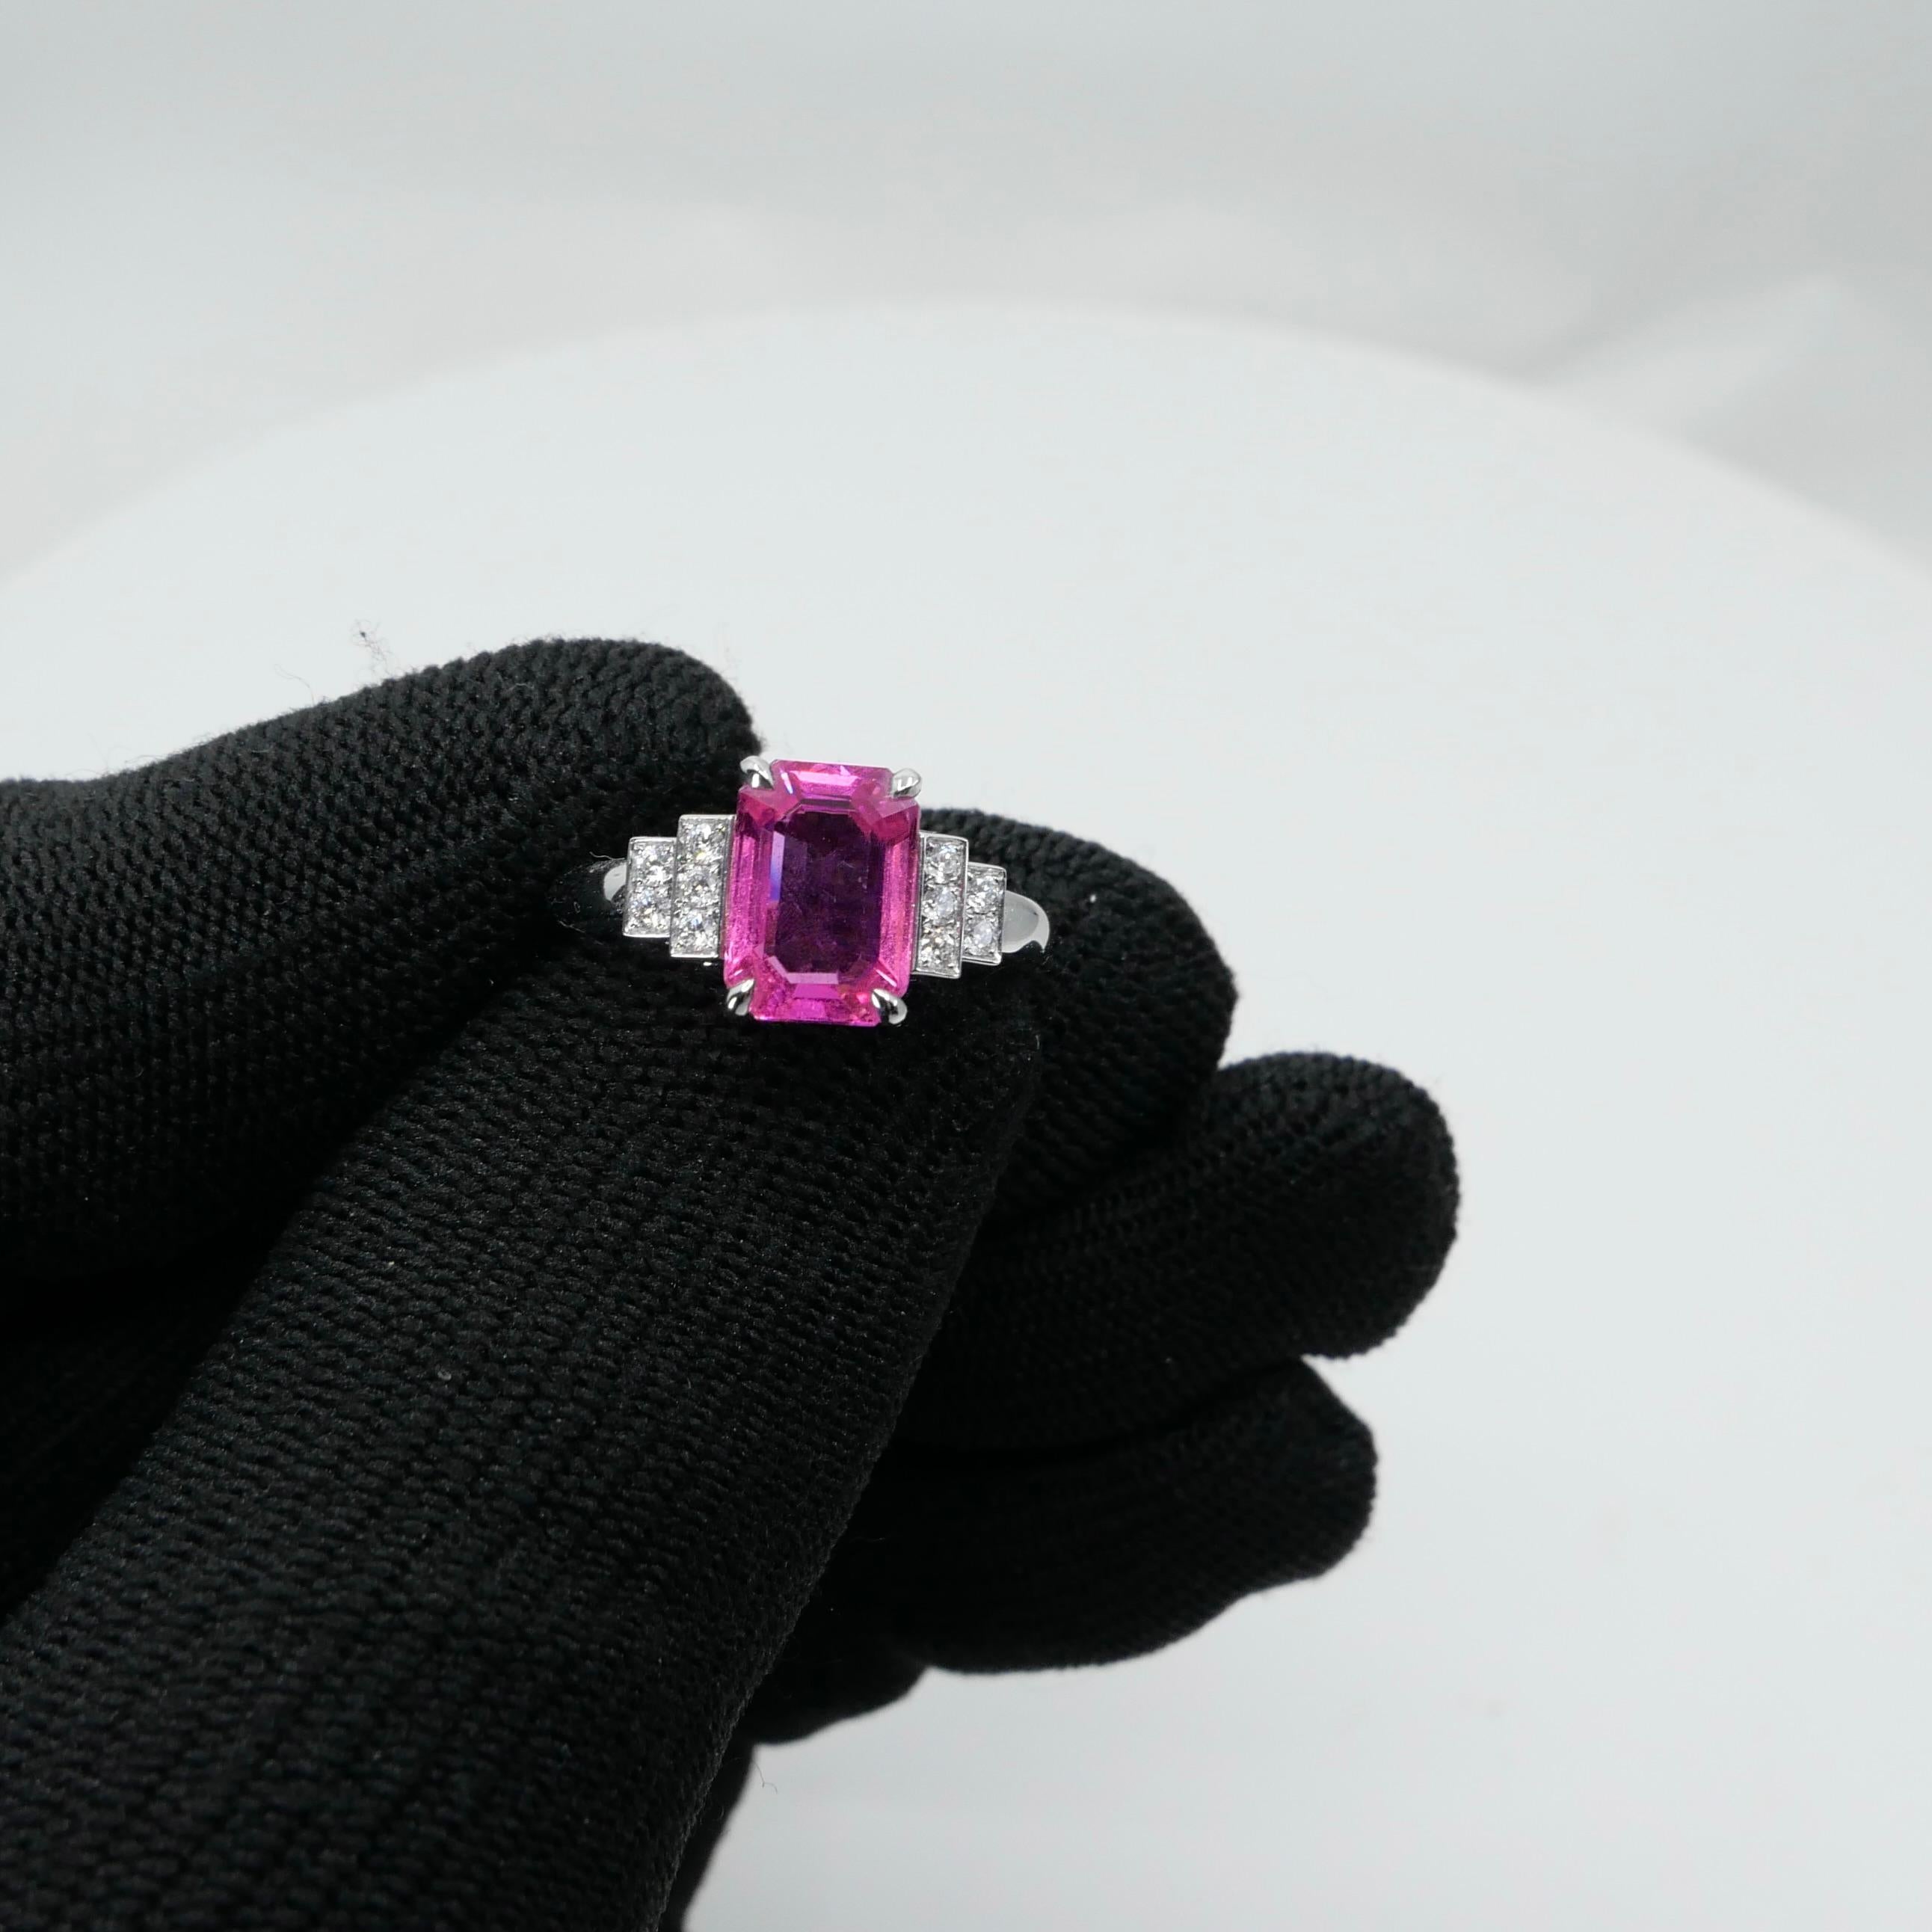 GRS Certified 3.11 Cts No Heat Pink Sapphire & Diamond Ring. Art Deco Style 4